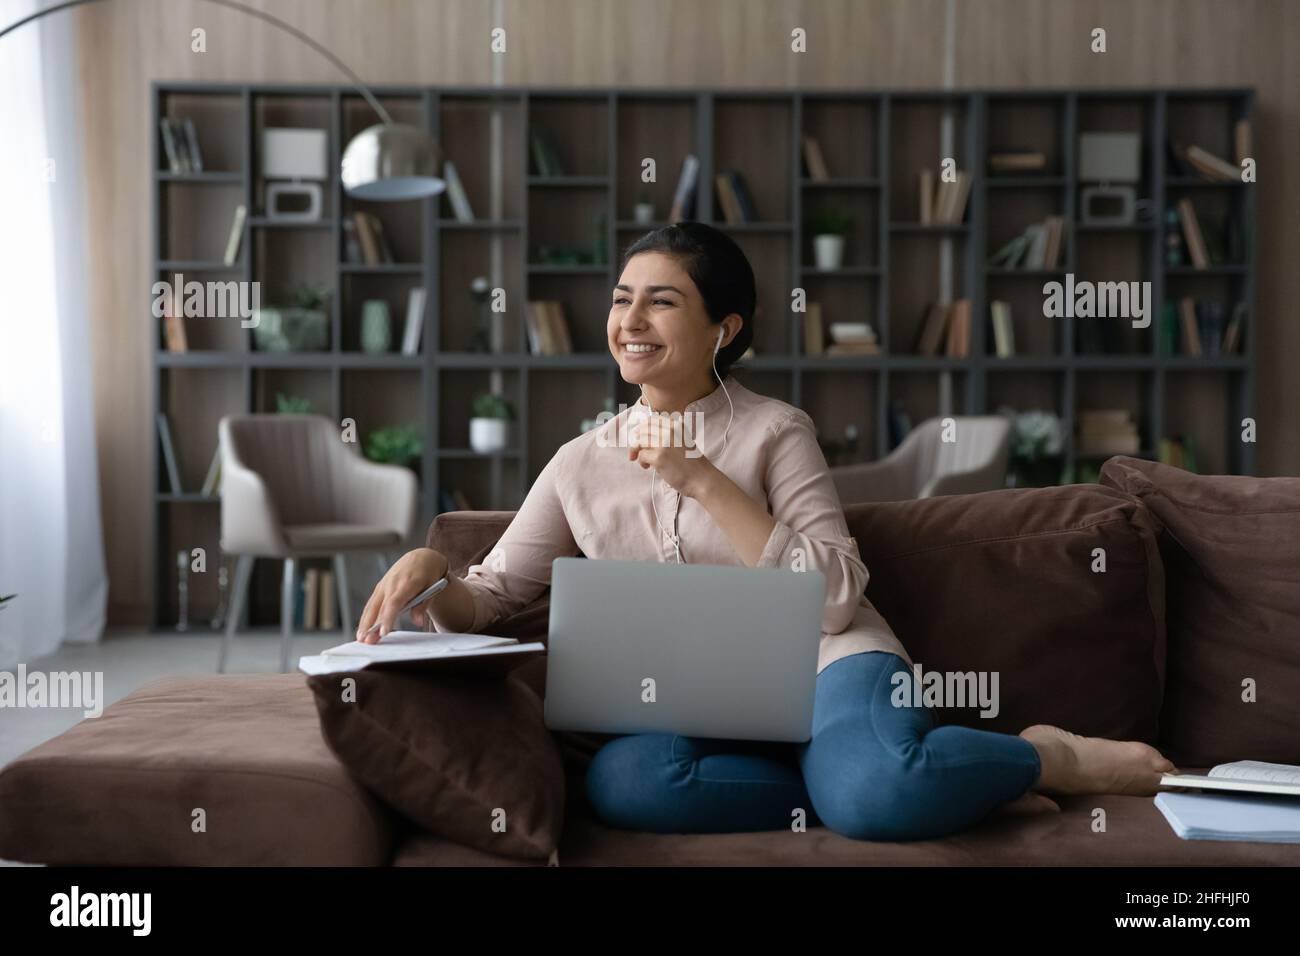 Happy young dreamy Indian woman studying online. Stock Photo